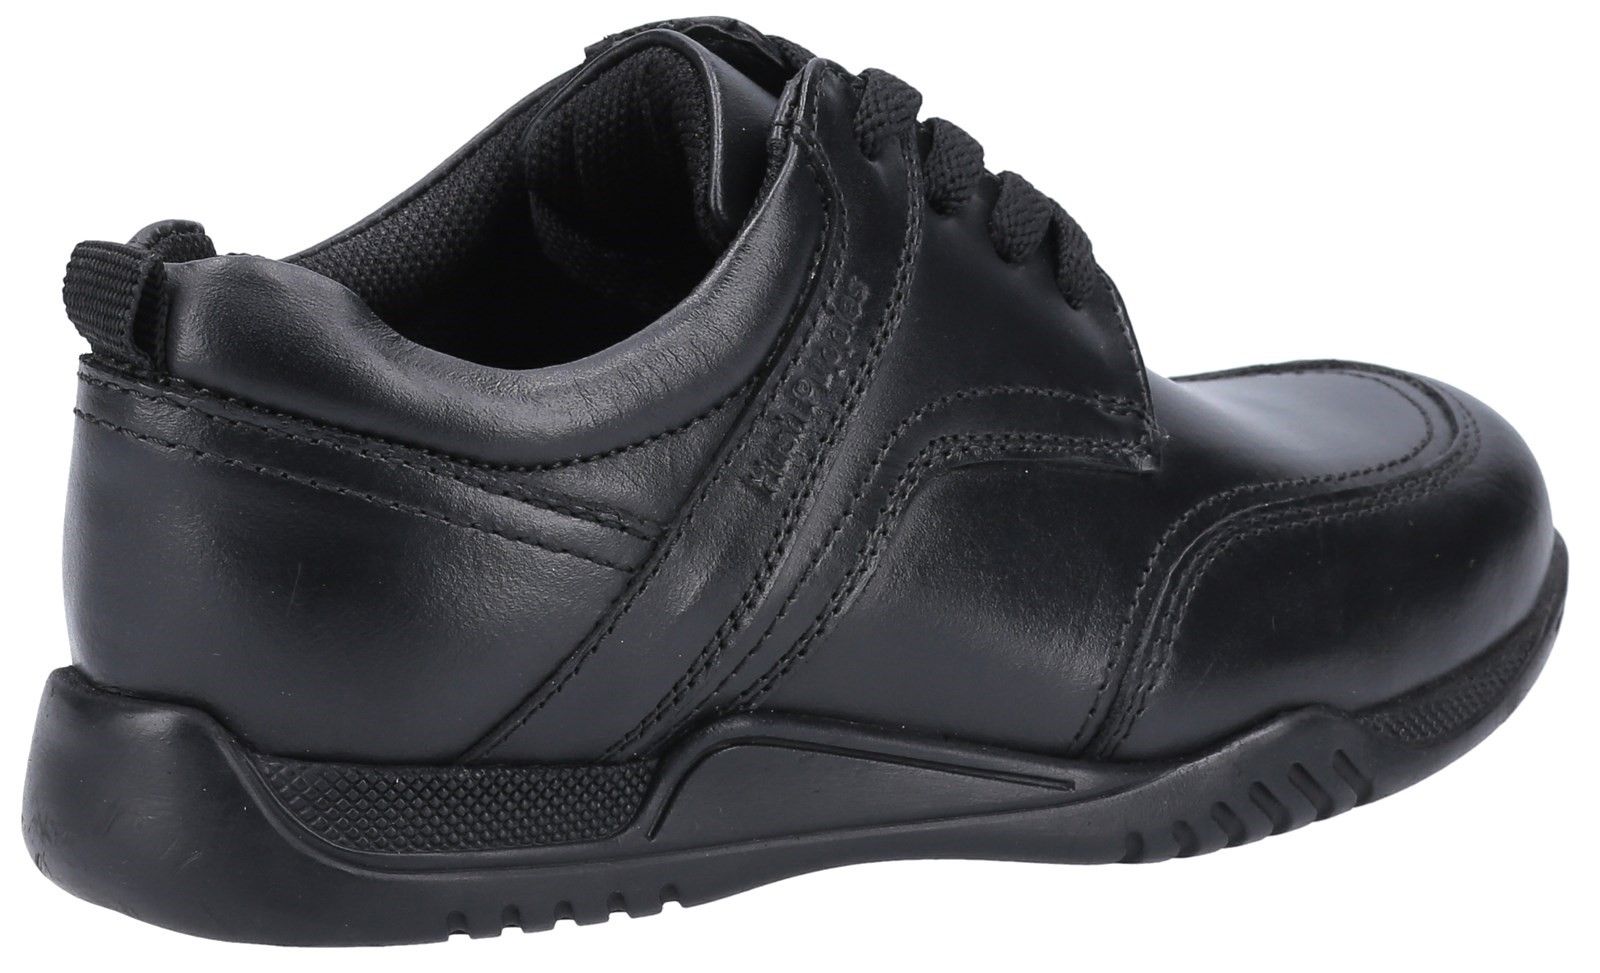 Harvey is a single fit smooth leather lace up boys school shoe, with reinforced panels on the toe and heel for additional support.  Lightweight midsole with a memory foam footbed providing all day comfort.Leather Upper. 
Memory Foam Insole. 
Micro-Fresh Lining.